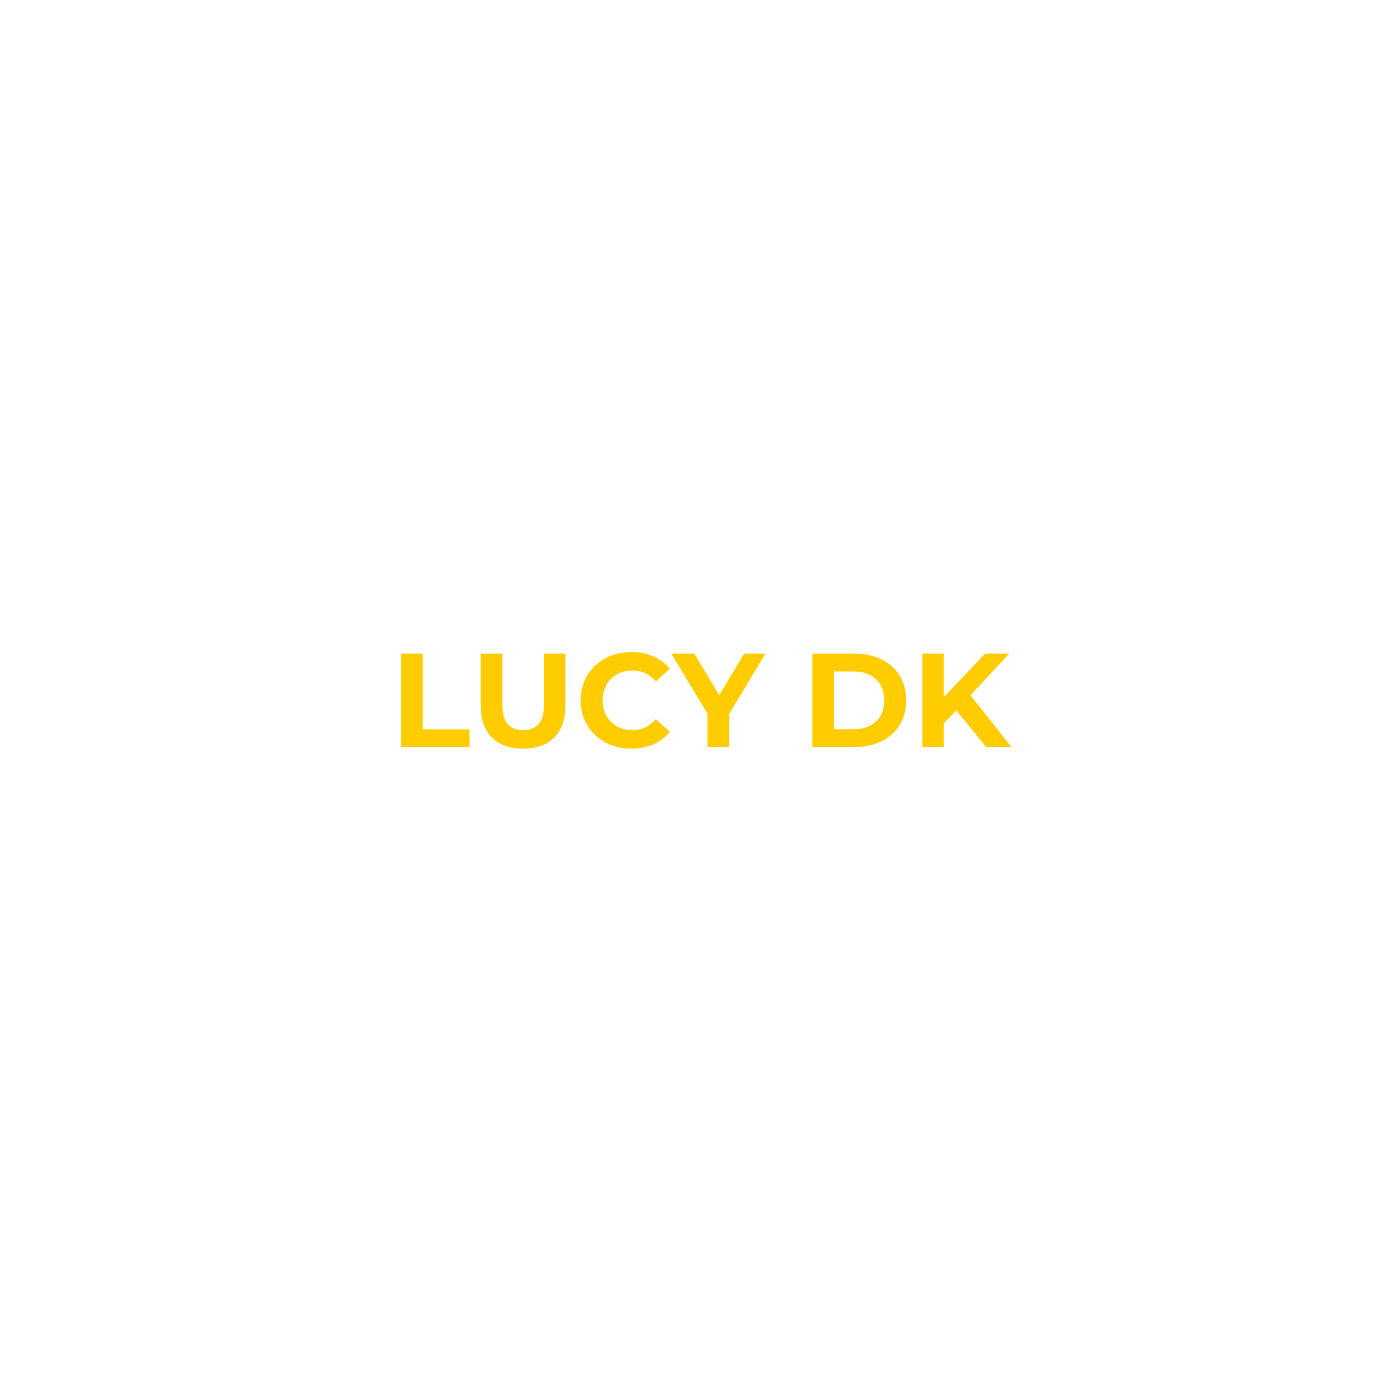 Lucy DK